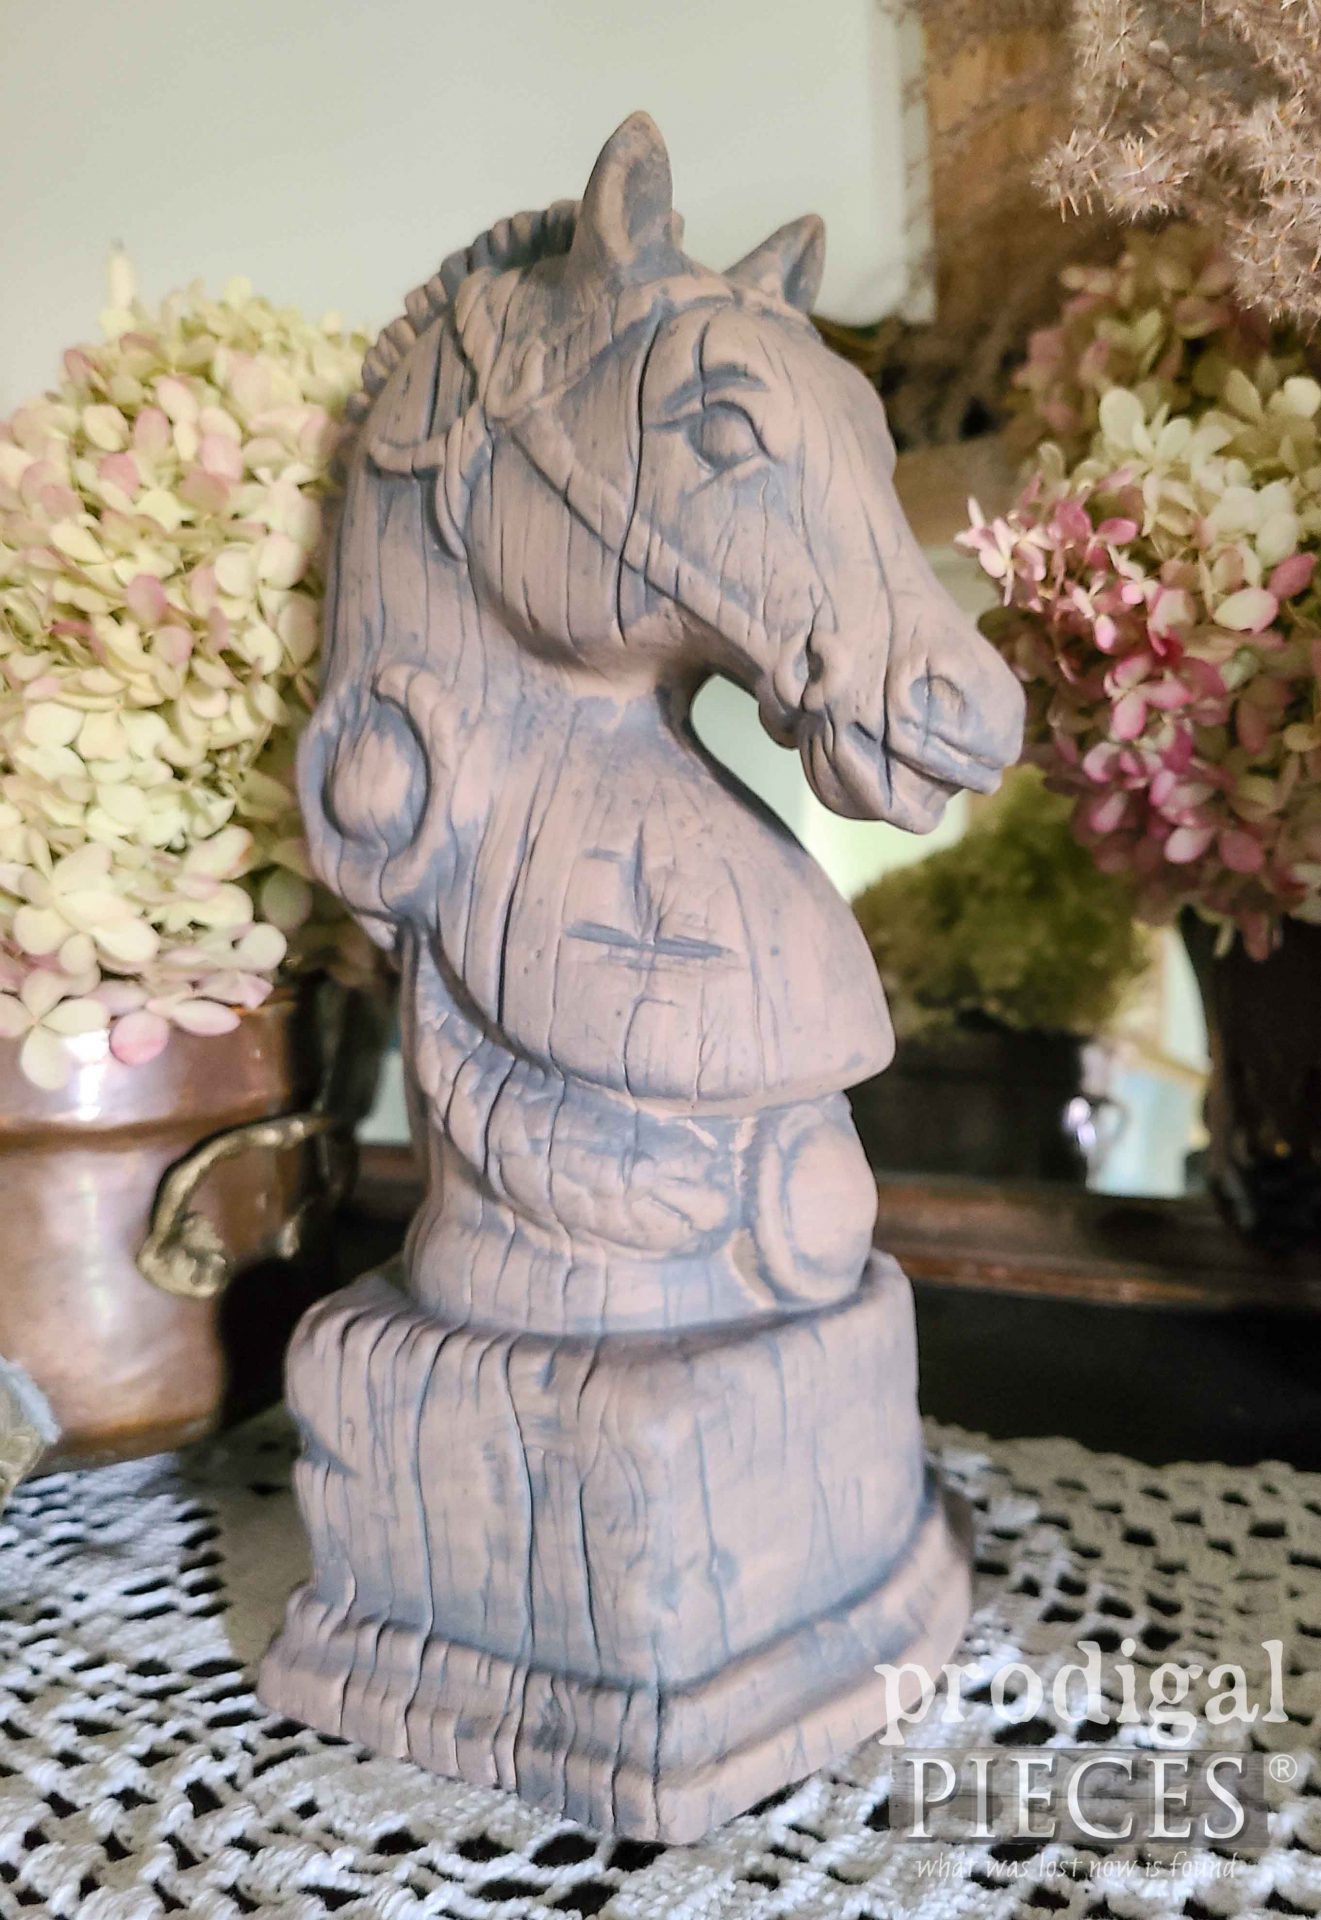 Vintage Bookend Horse Head Makeover by Prodigal Pieces | prodigalpieces.com #prodigalpieces #diy #home #farmhouse